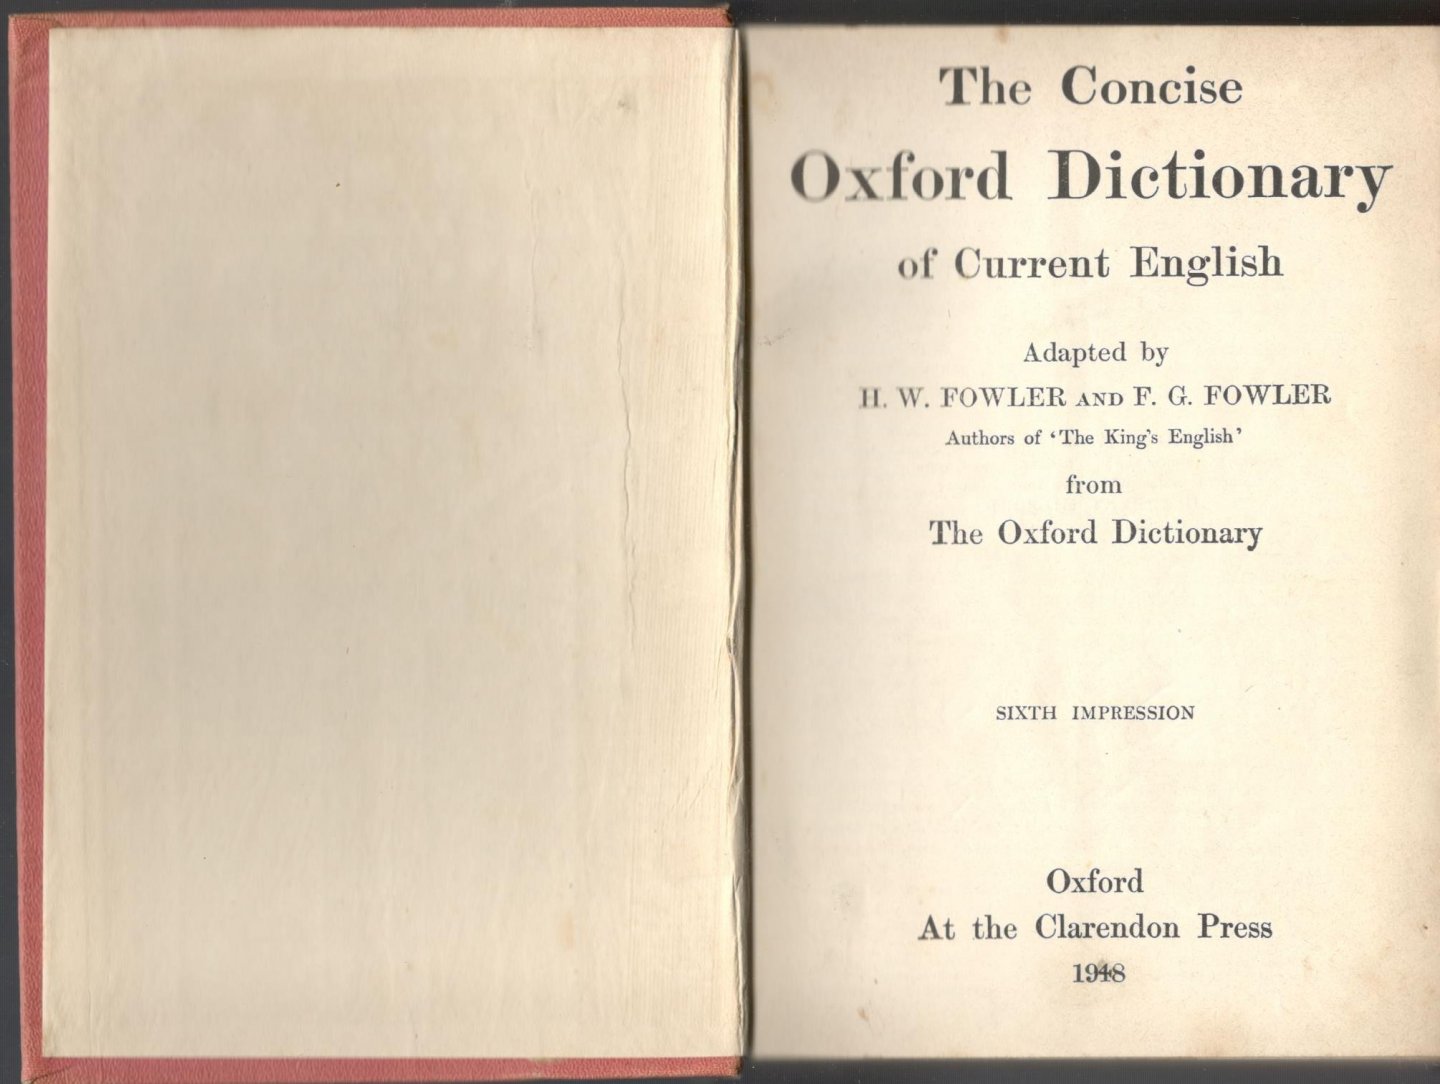 Fowler, H.W. and F.G. Fowler. - The Concise Oxford Dictionary of Current English,  adapted by Fowler and Fowler, authors of 'The King`s English` from The Oxford Dictionary.